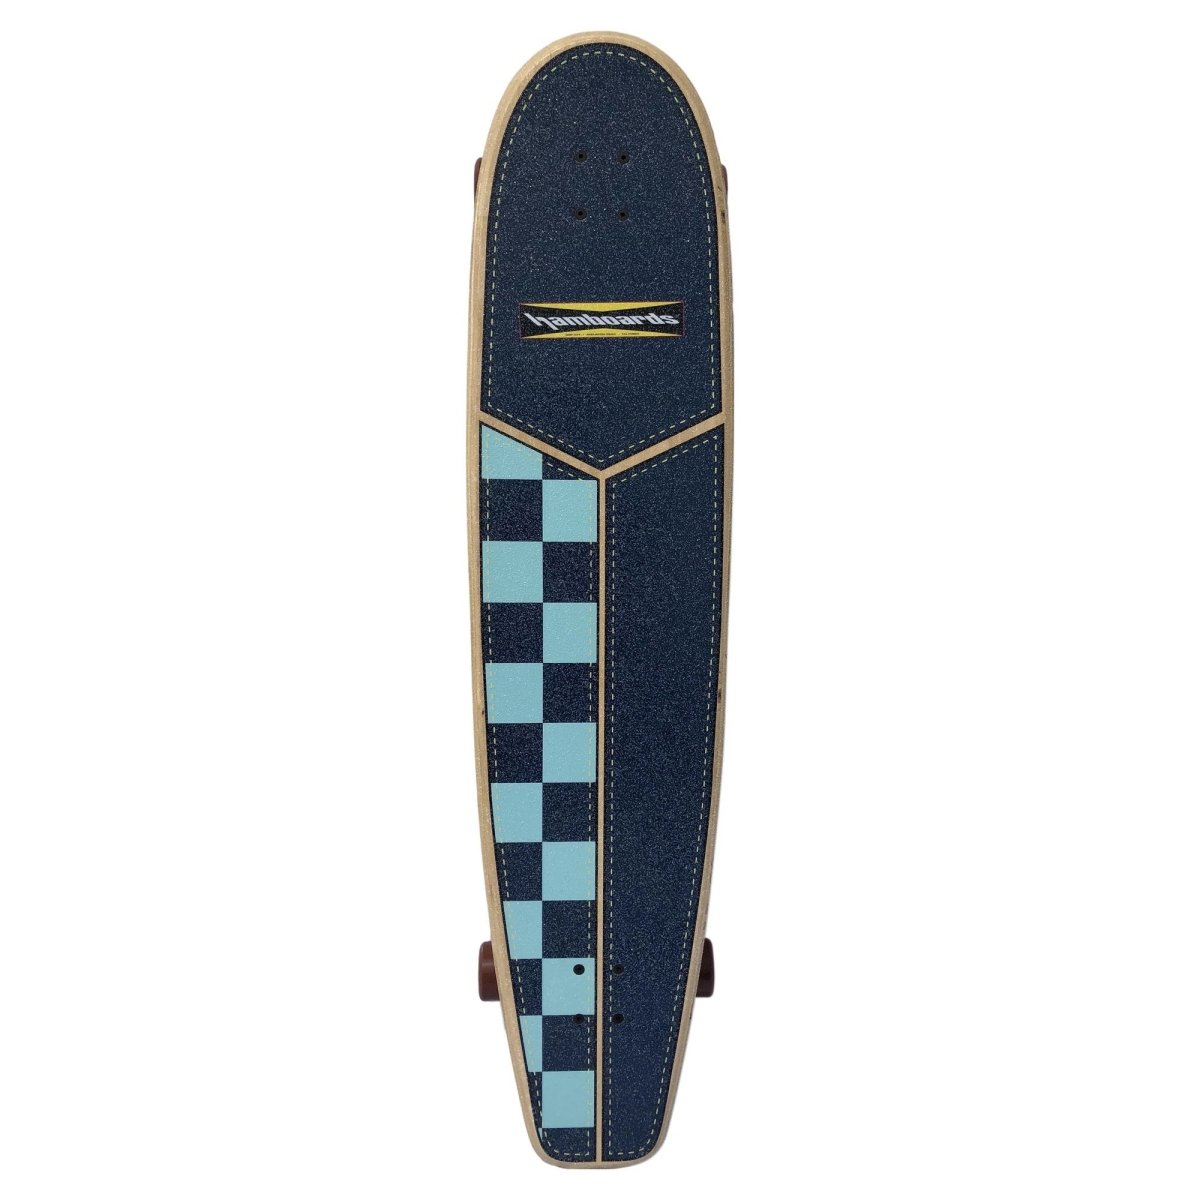 Hamboard 45" HHOP Carving Surfskates - Navy Light Blue Checkers - Surfskate - Completes